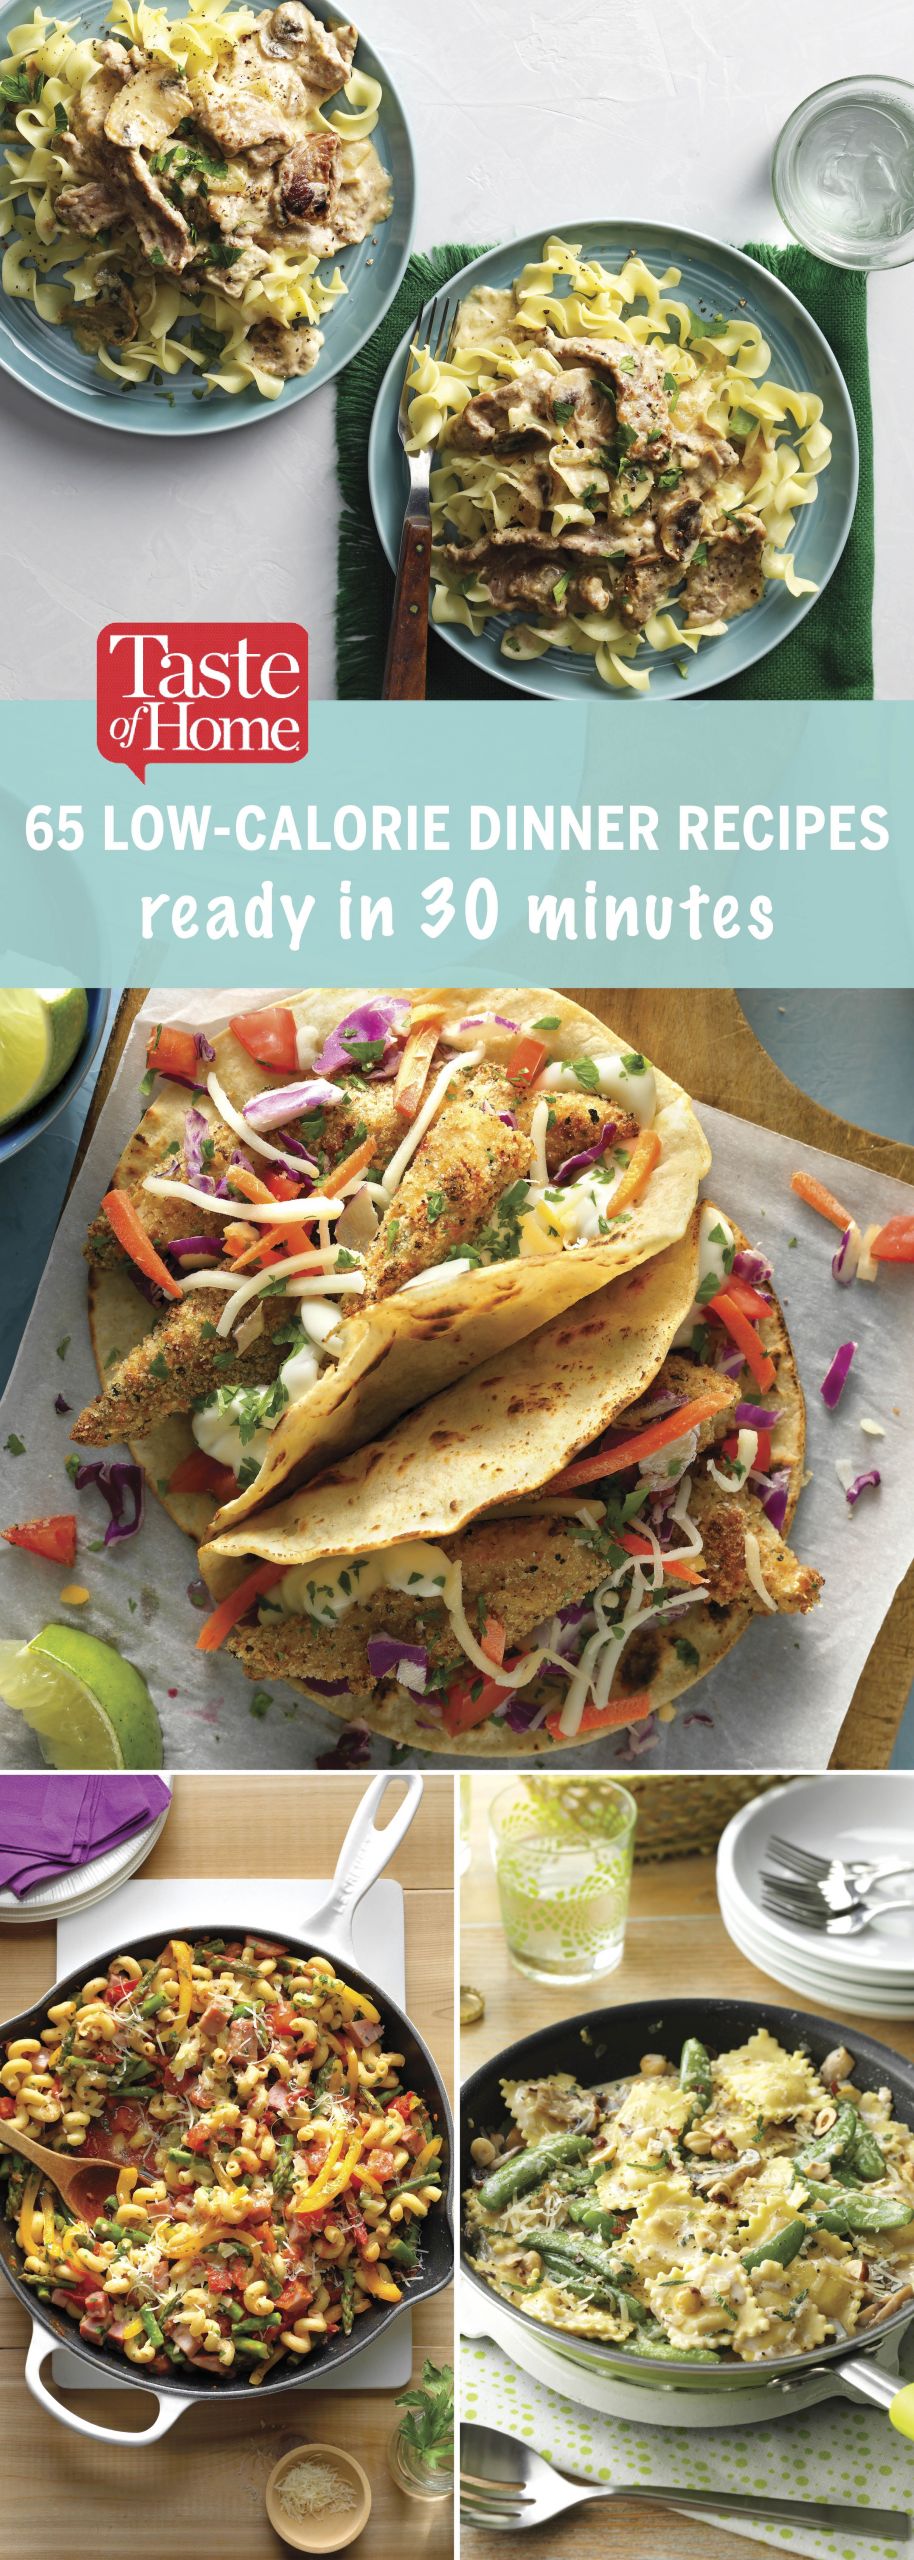 Low Calories Dinners
 65 Low Calorie Dinner Recipes Ready in 30 Minutes